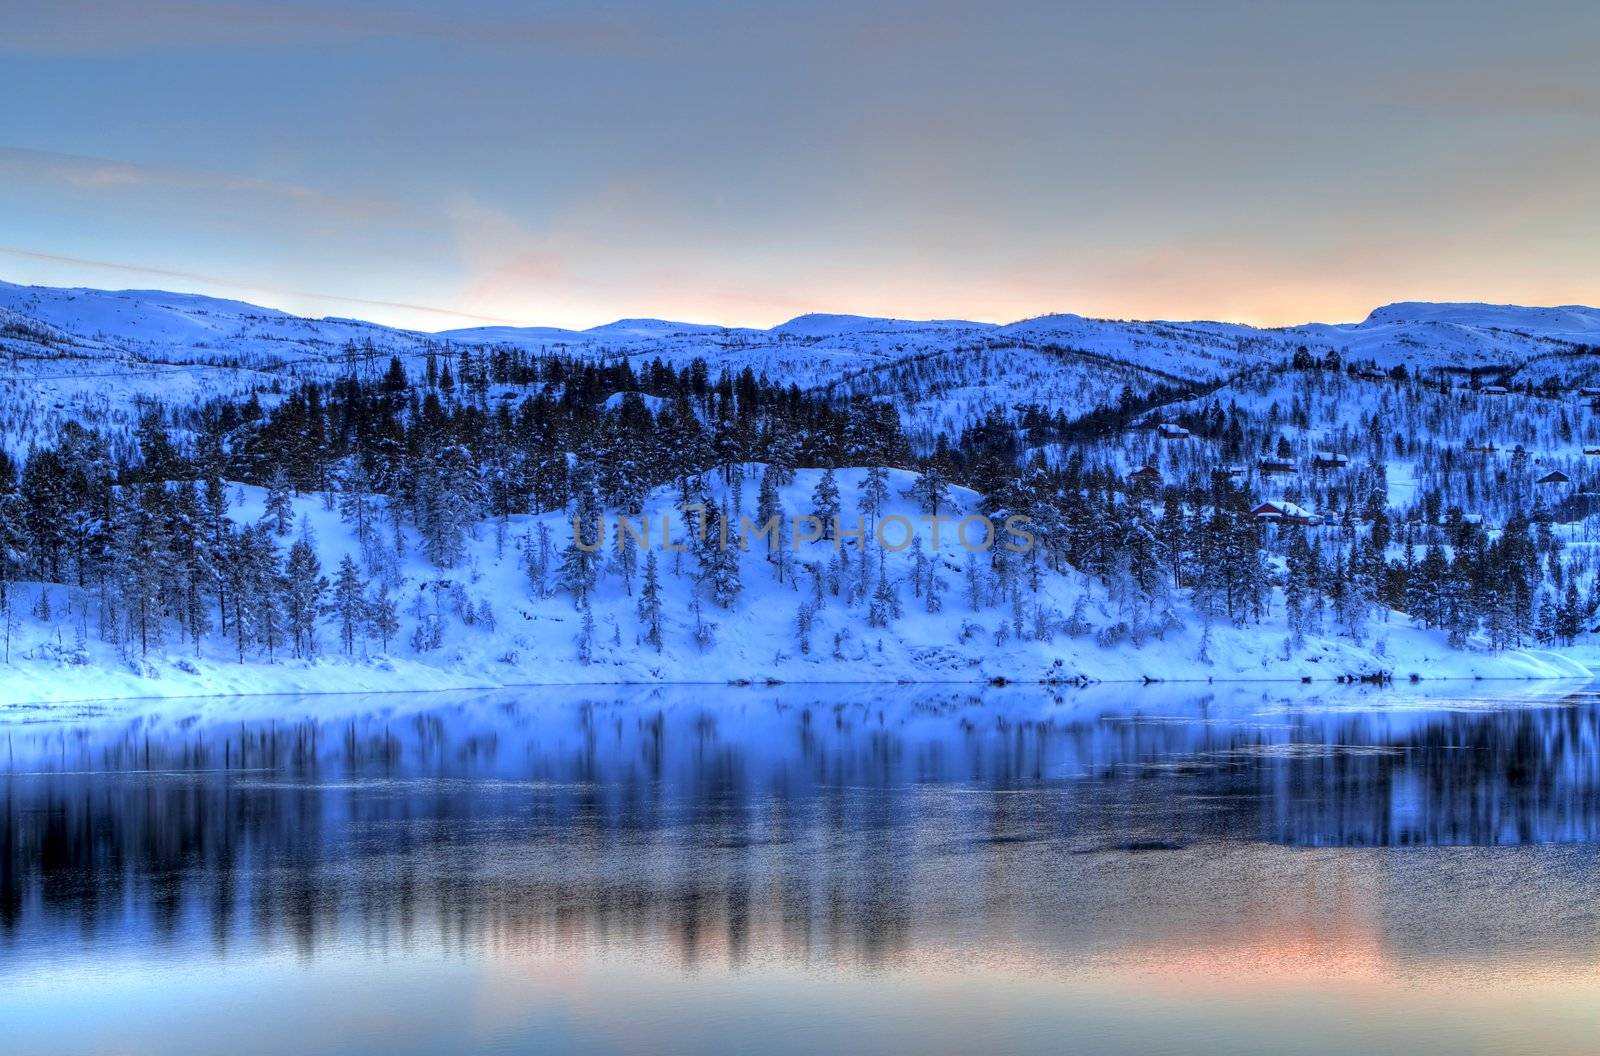 Winter landscape in the Norwegian mountains